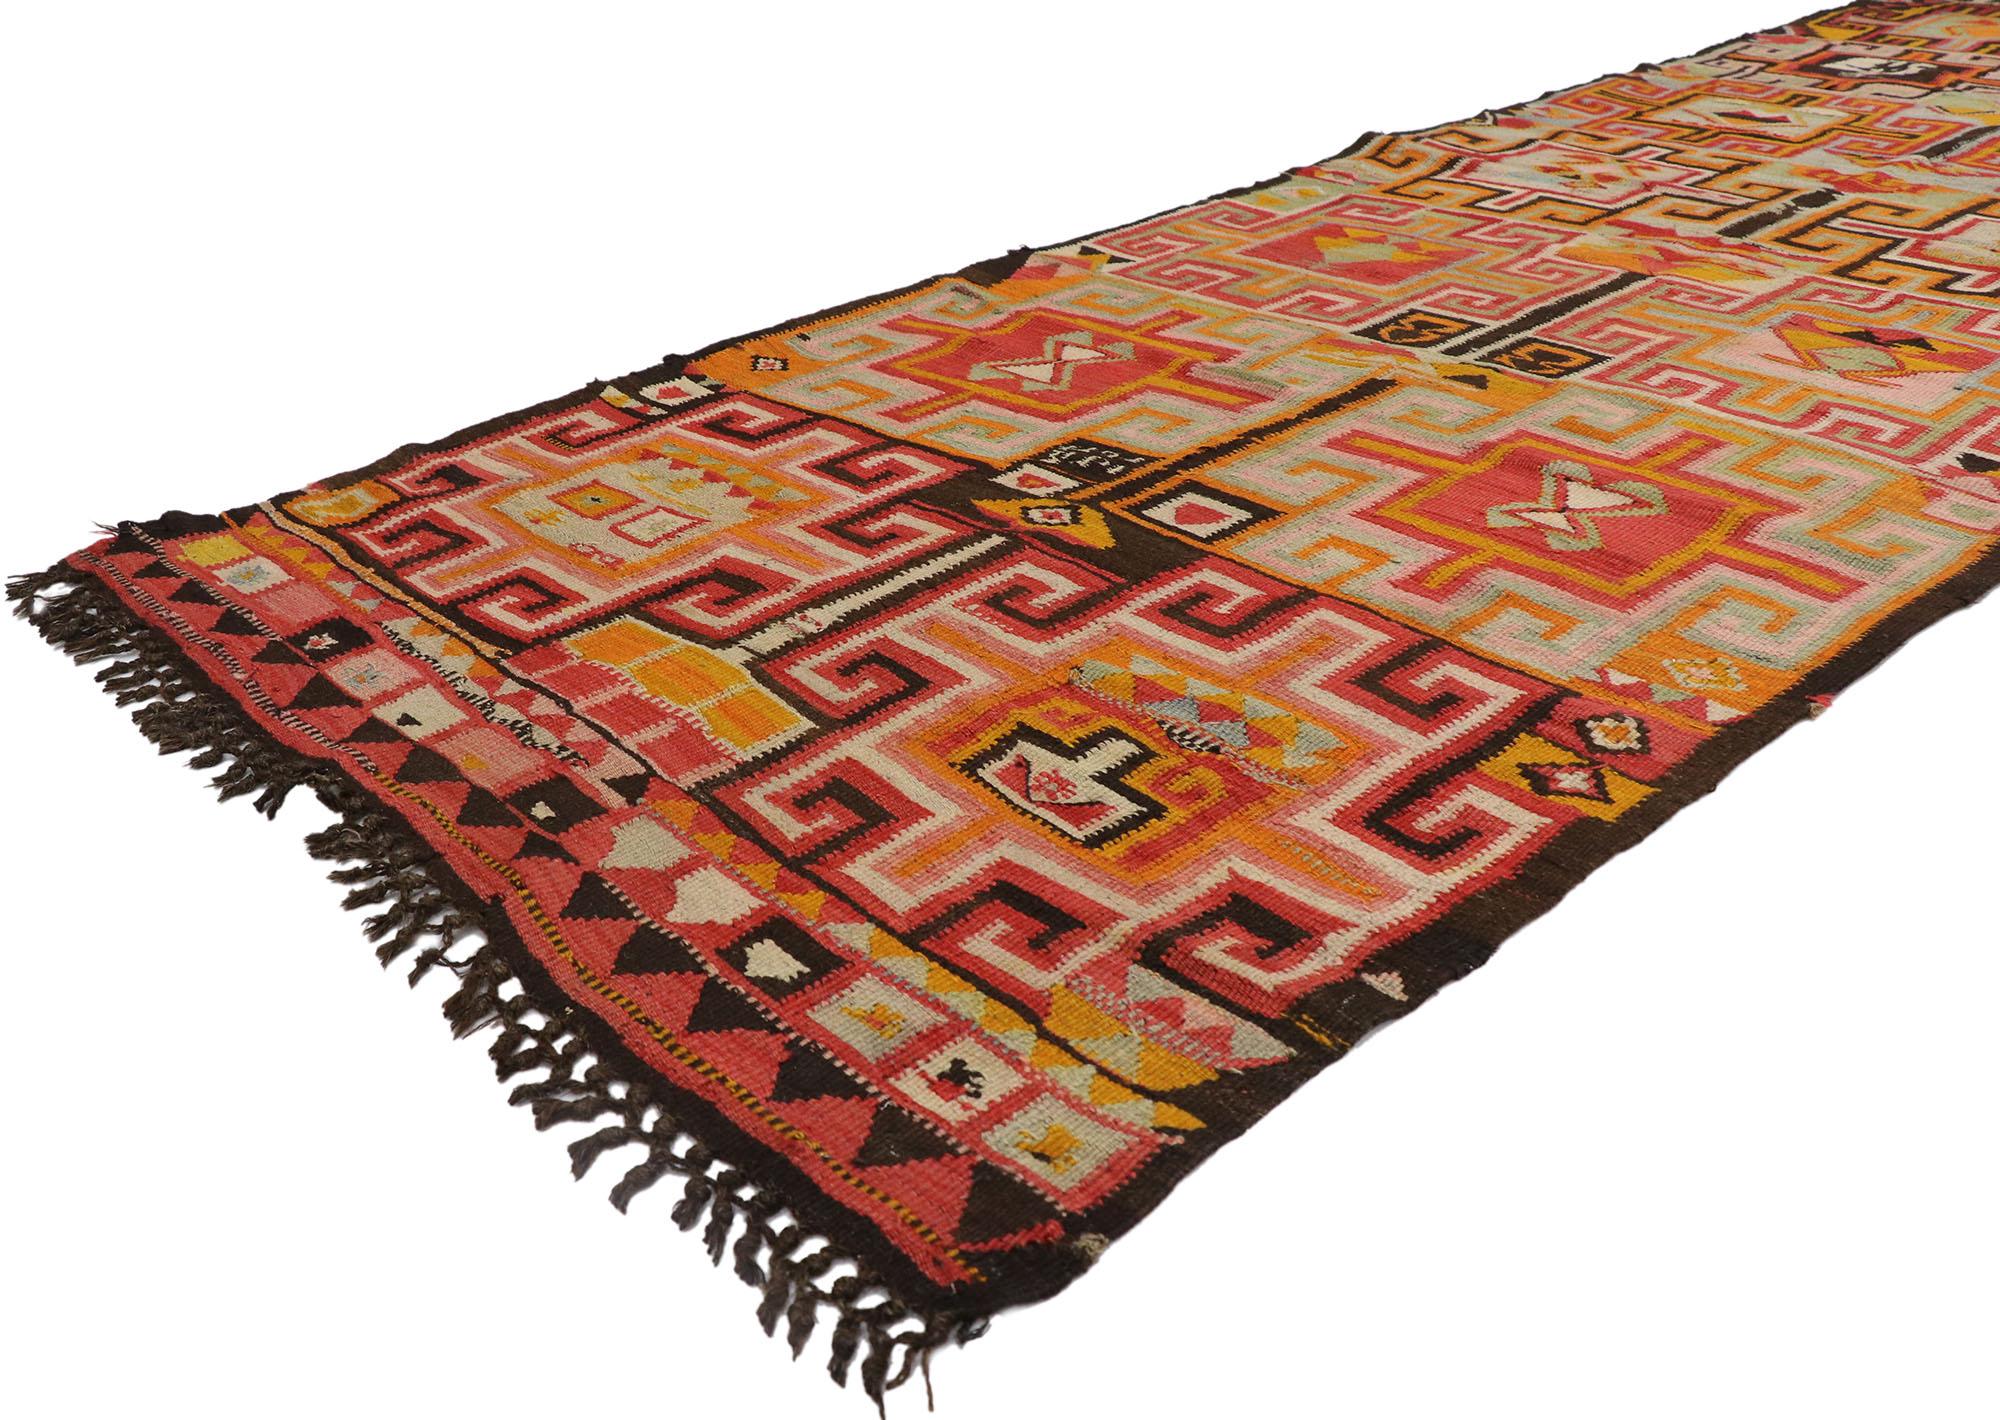 78030 Vintage Turkish Kilim runner with boho chic Southwestern Tribal Style 04'00 x 11'10. Full of tiny details and a bold expressive design combined with vibrant colors and tribal style, this hand-woven wool vintage Turkish kilim runner is a